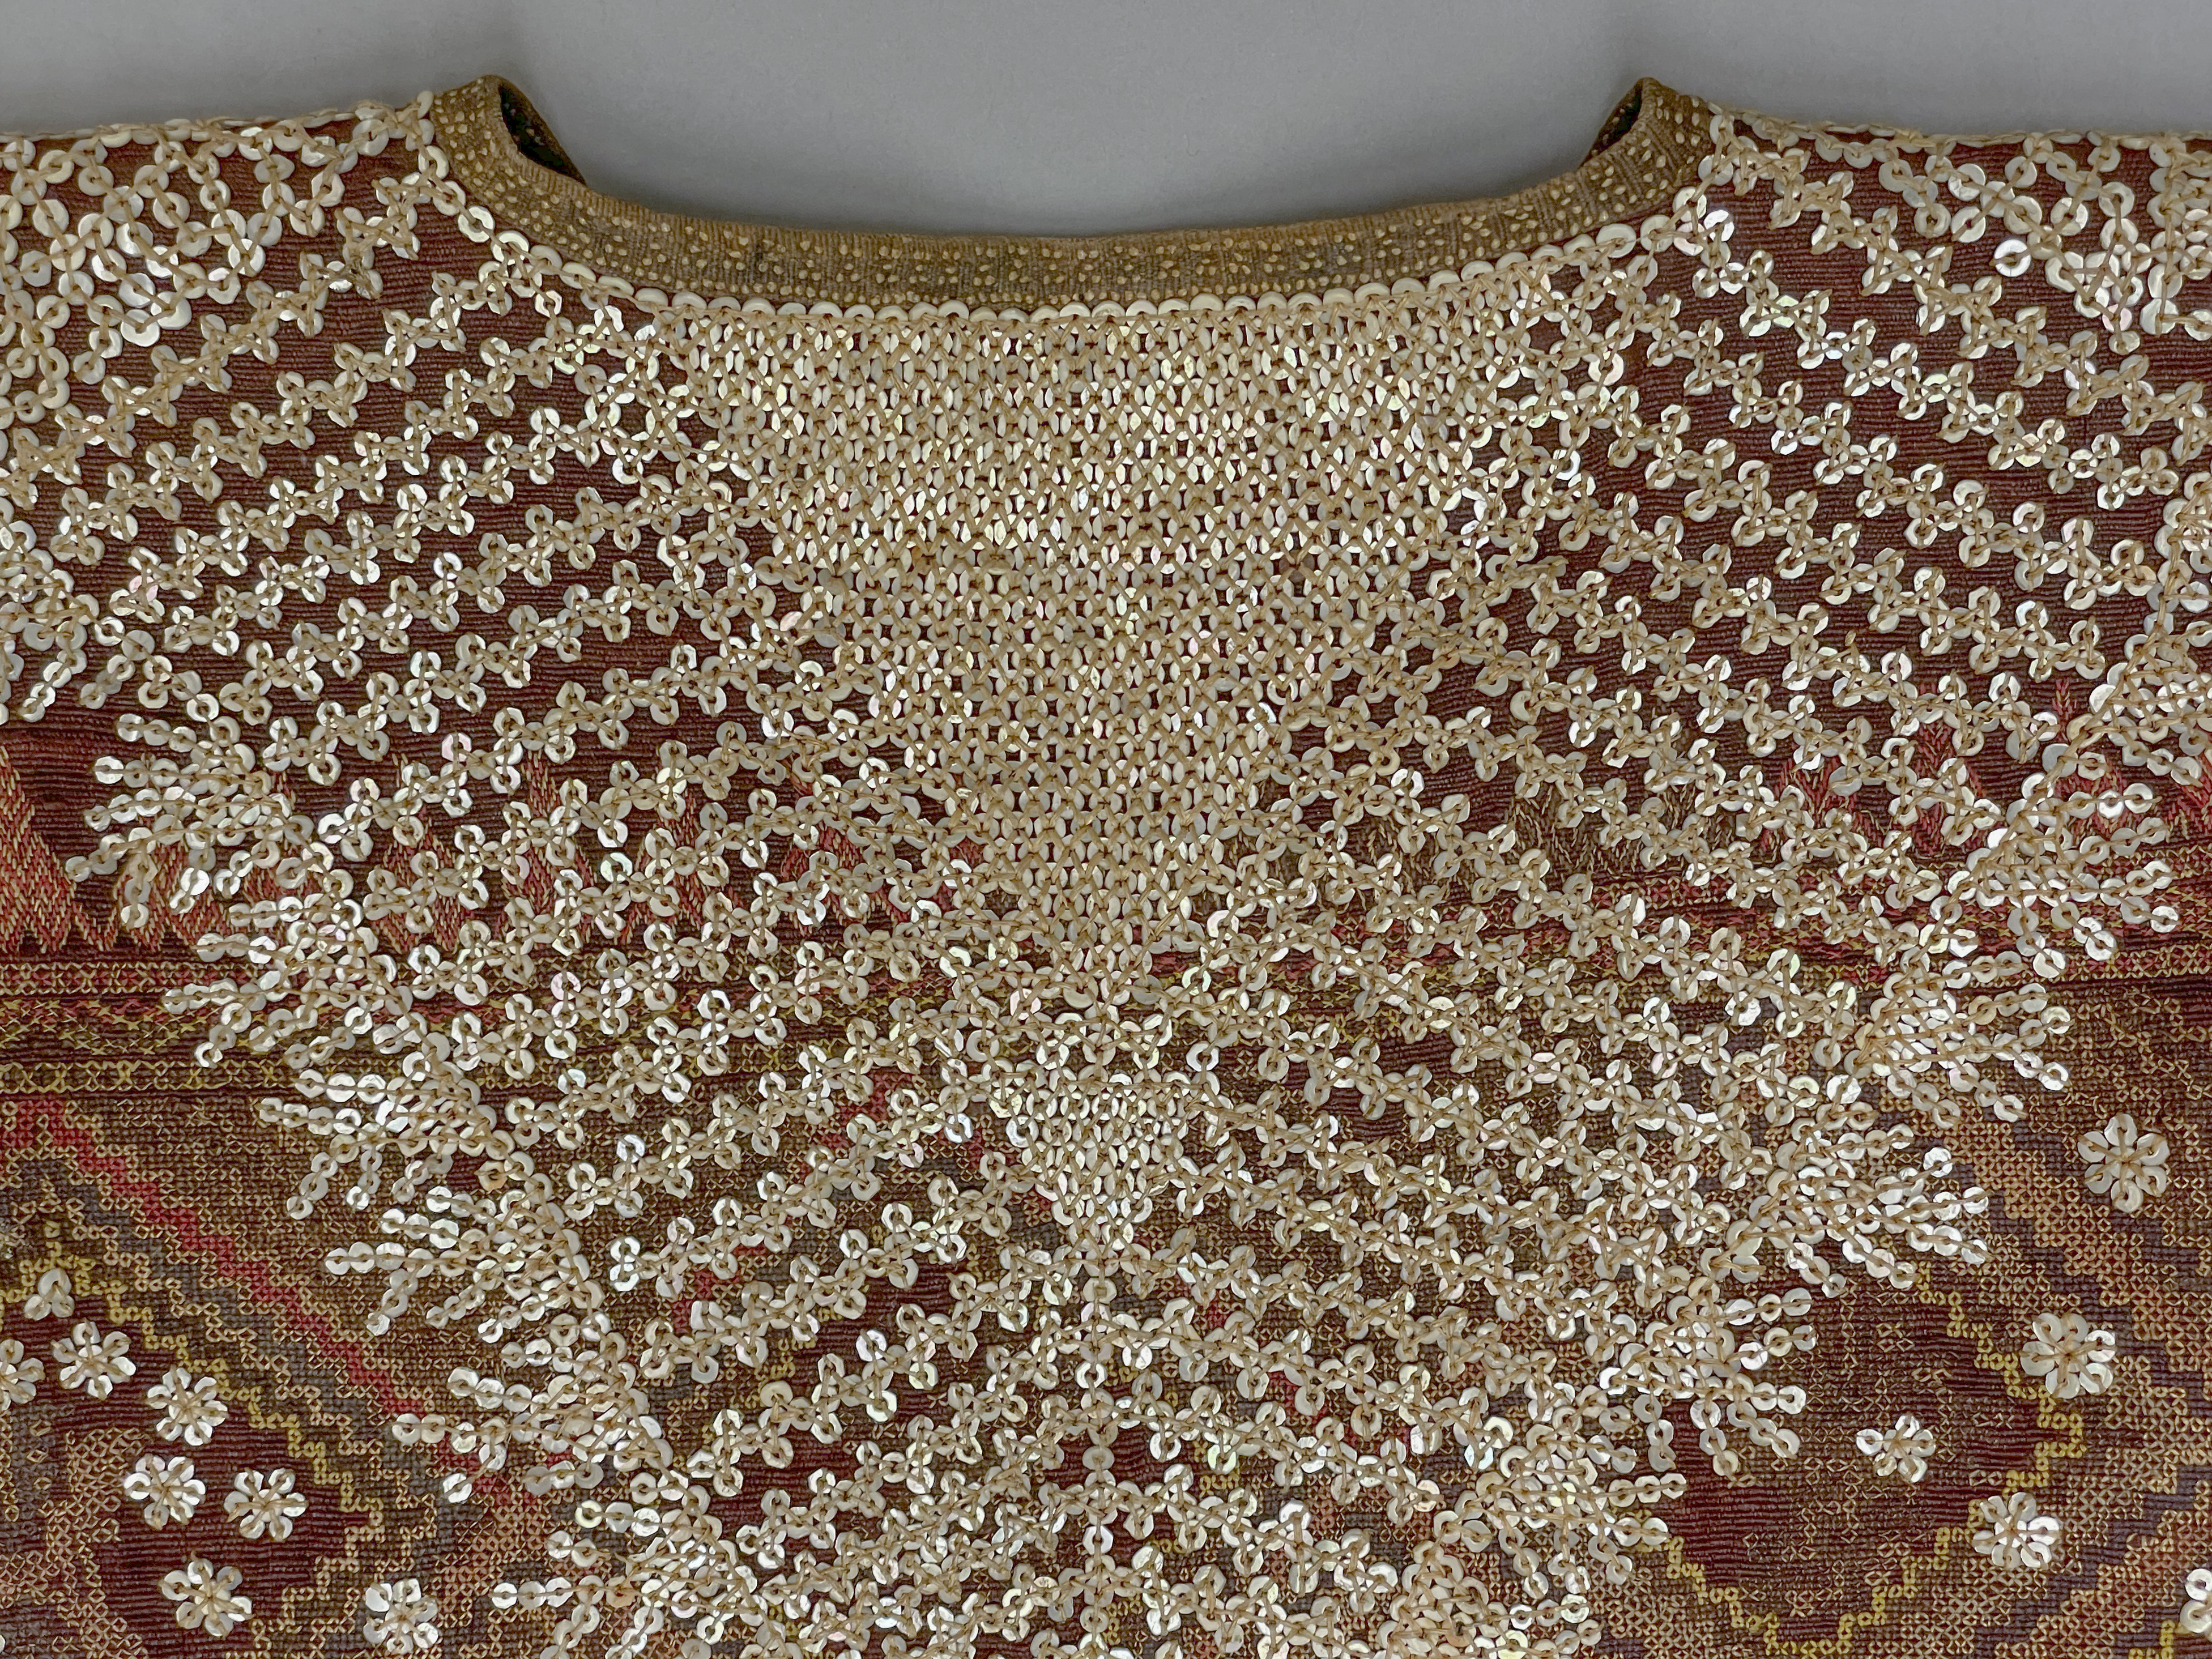 detail view of back collar (c) Field Museum of Natural History - CC BY-NC 4.0